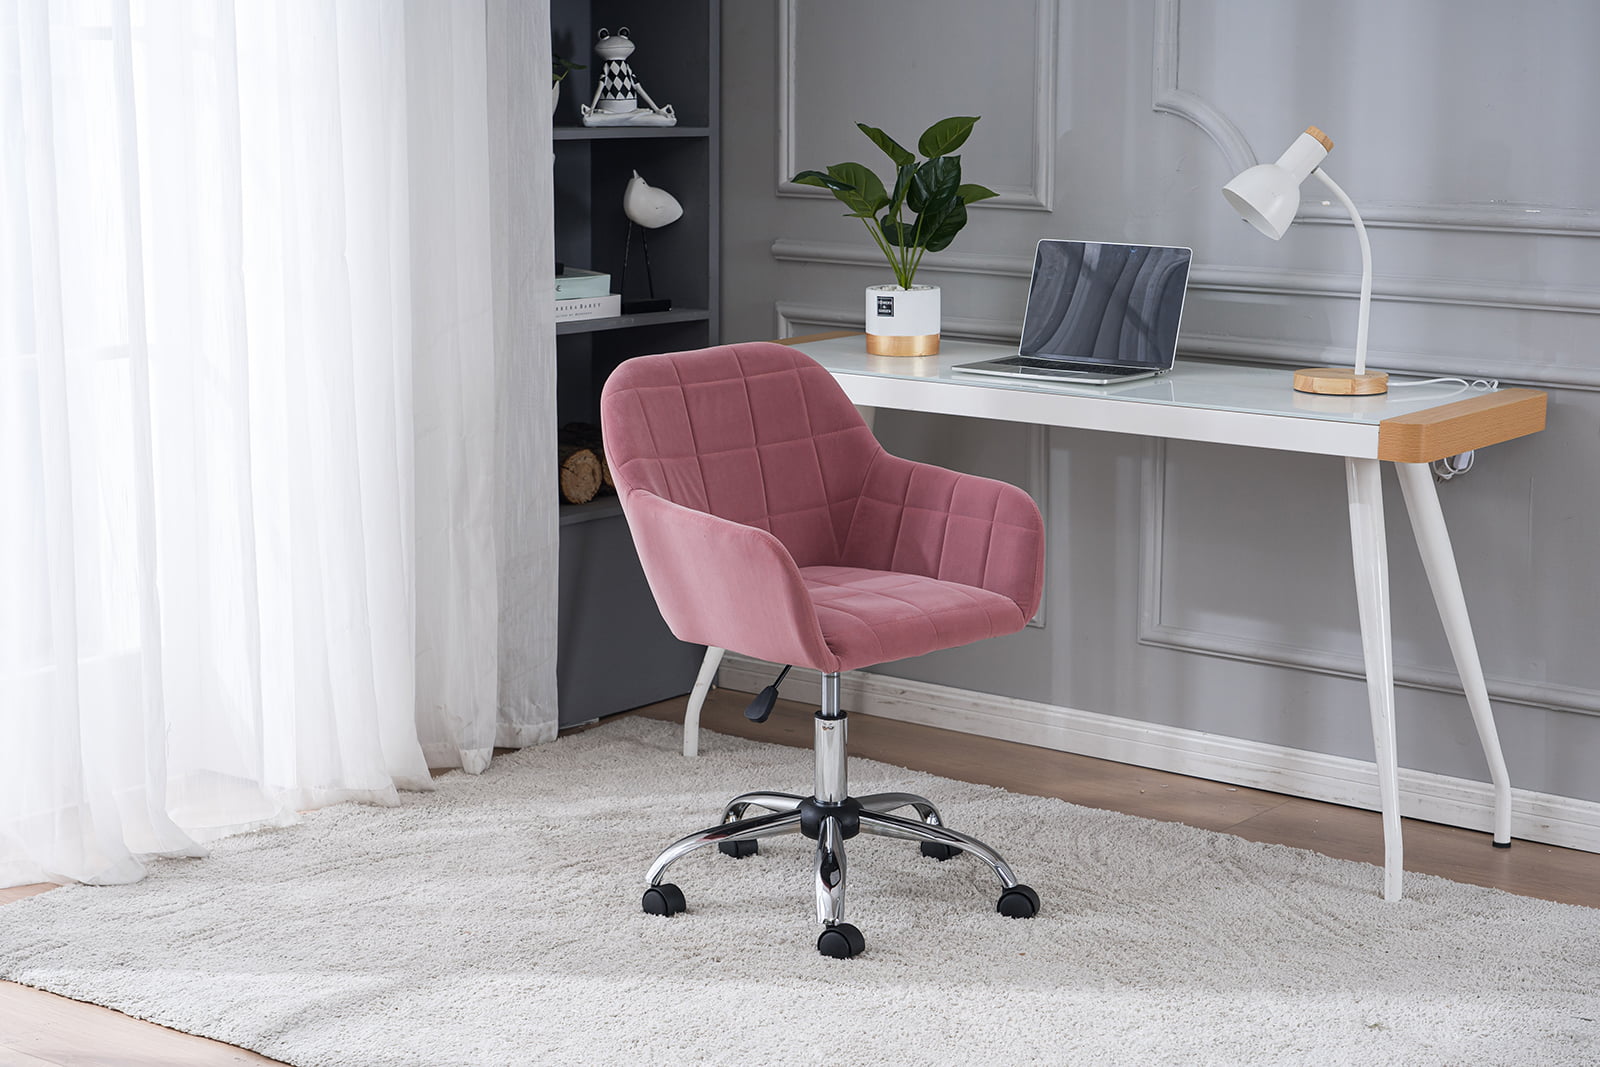 Details about   PC Gaming Chair Massage Office Chair Ergonomic Desk Adjustable PU Leather Pink 